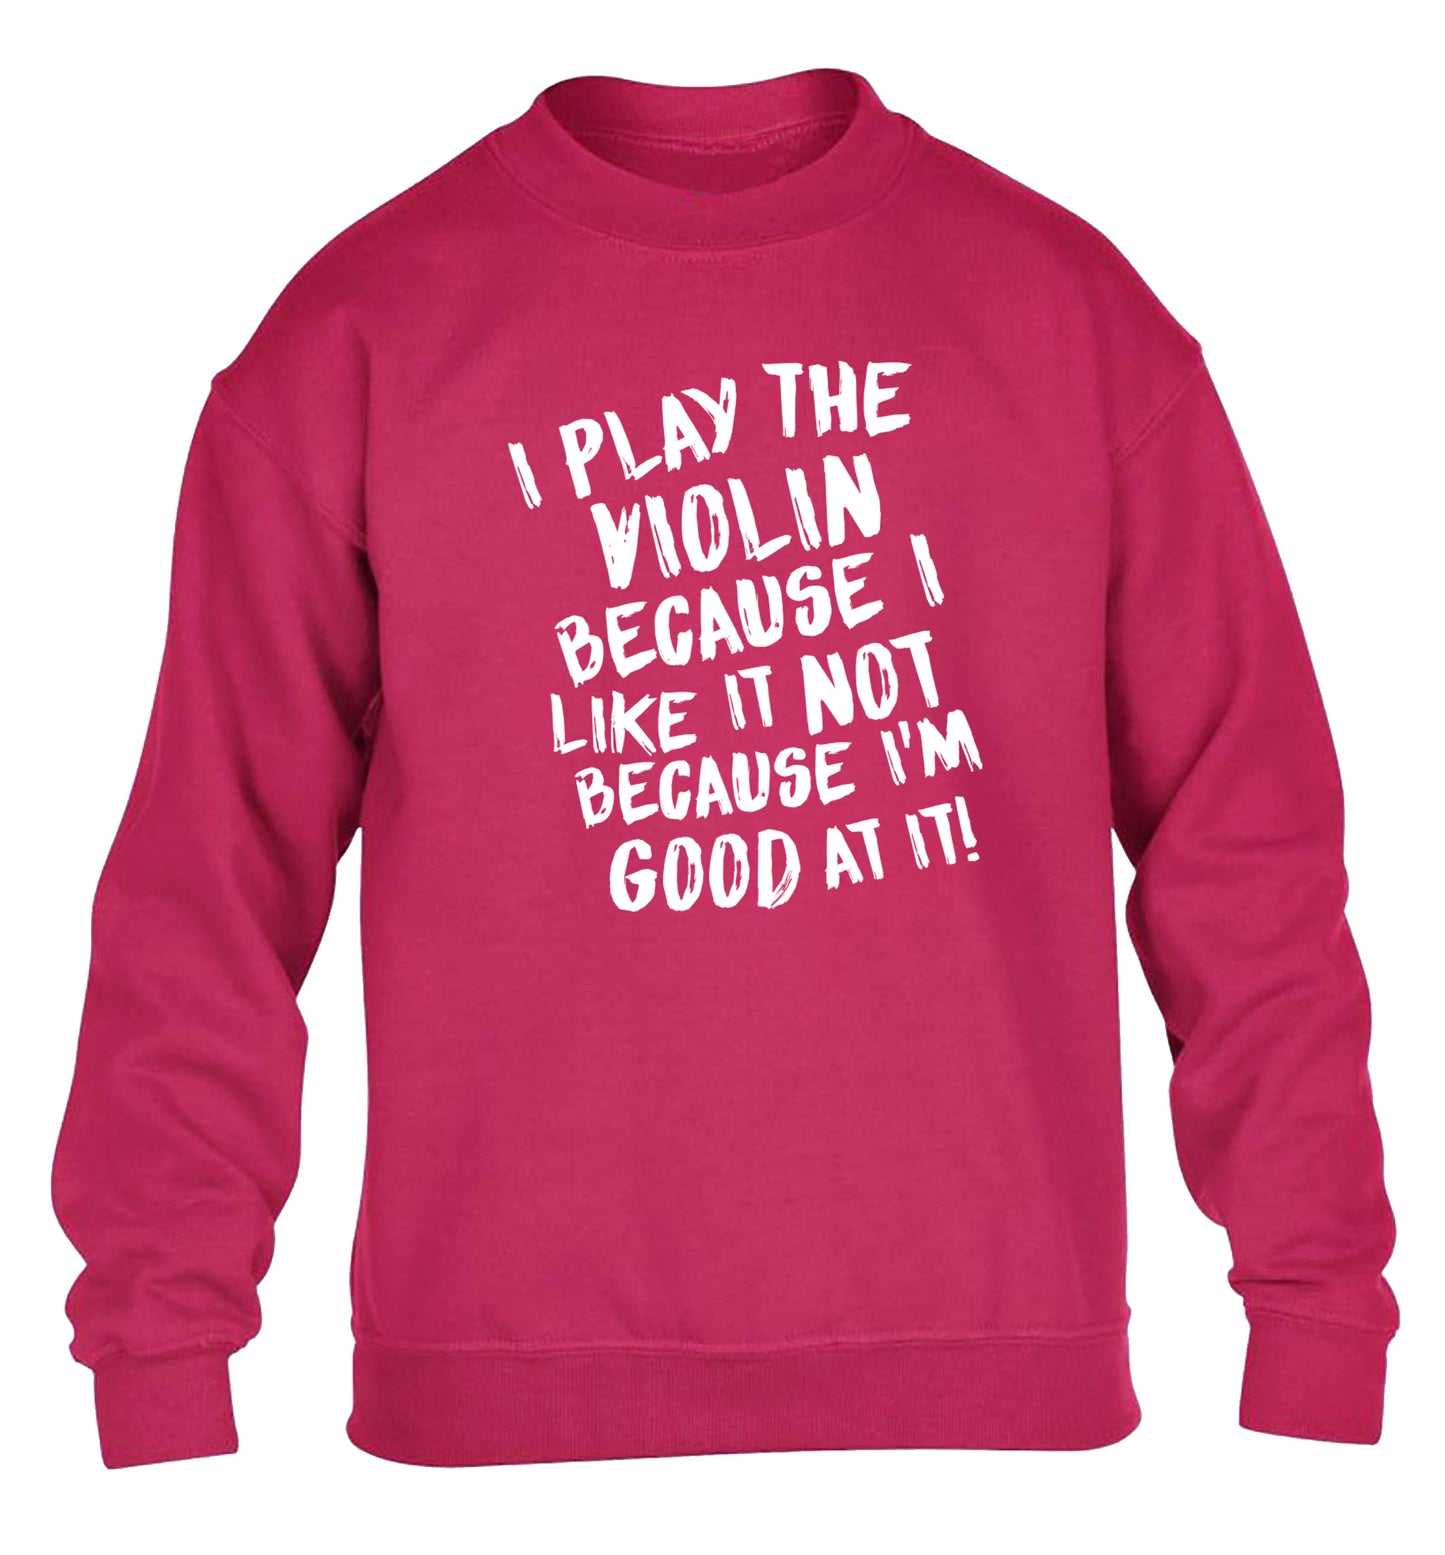 I play the violin because I like it not because I'm good at it children's pink sweater 12-13 Years